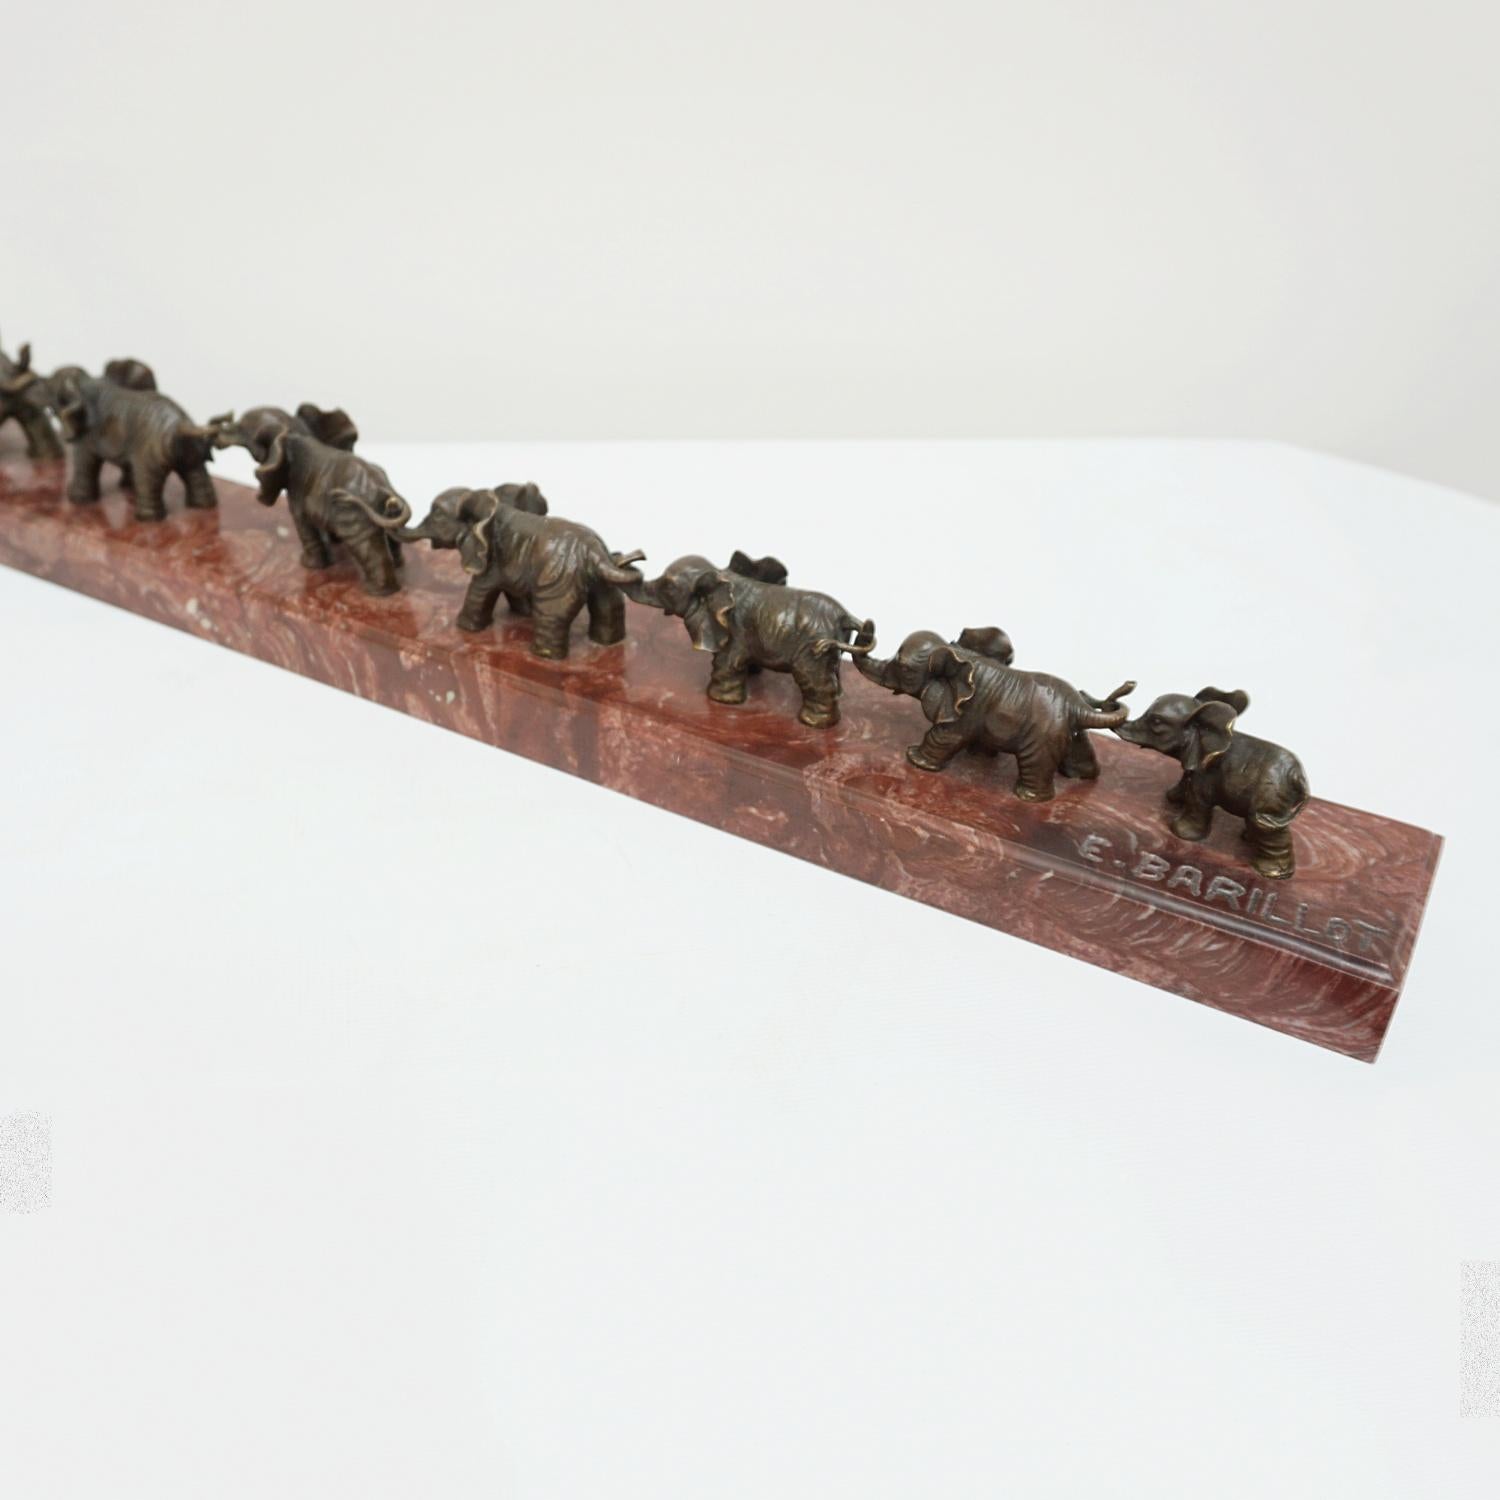 Contemporary Bronze Sculpture of a Herd of Elephants on a Marble Base 8